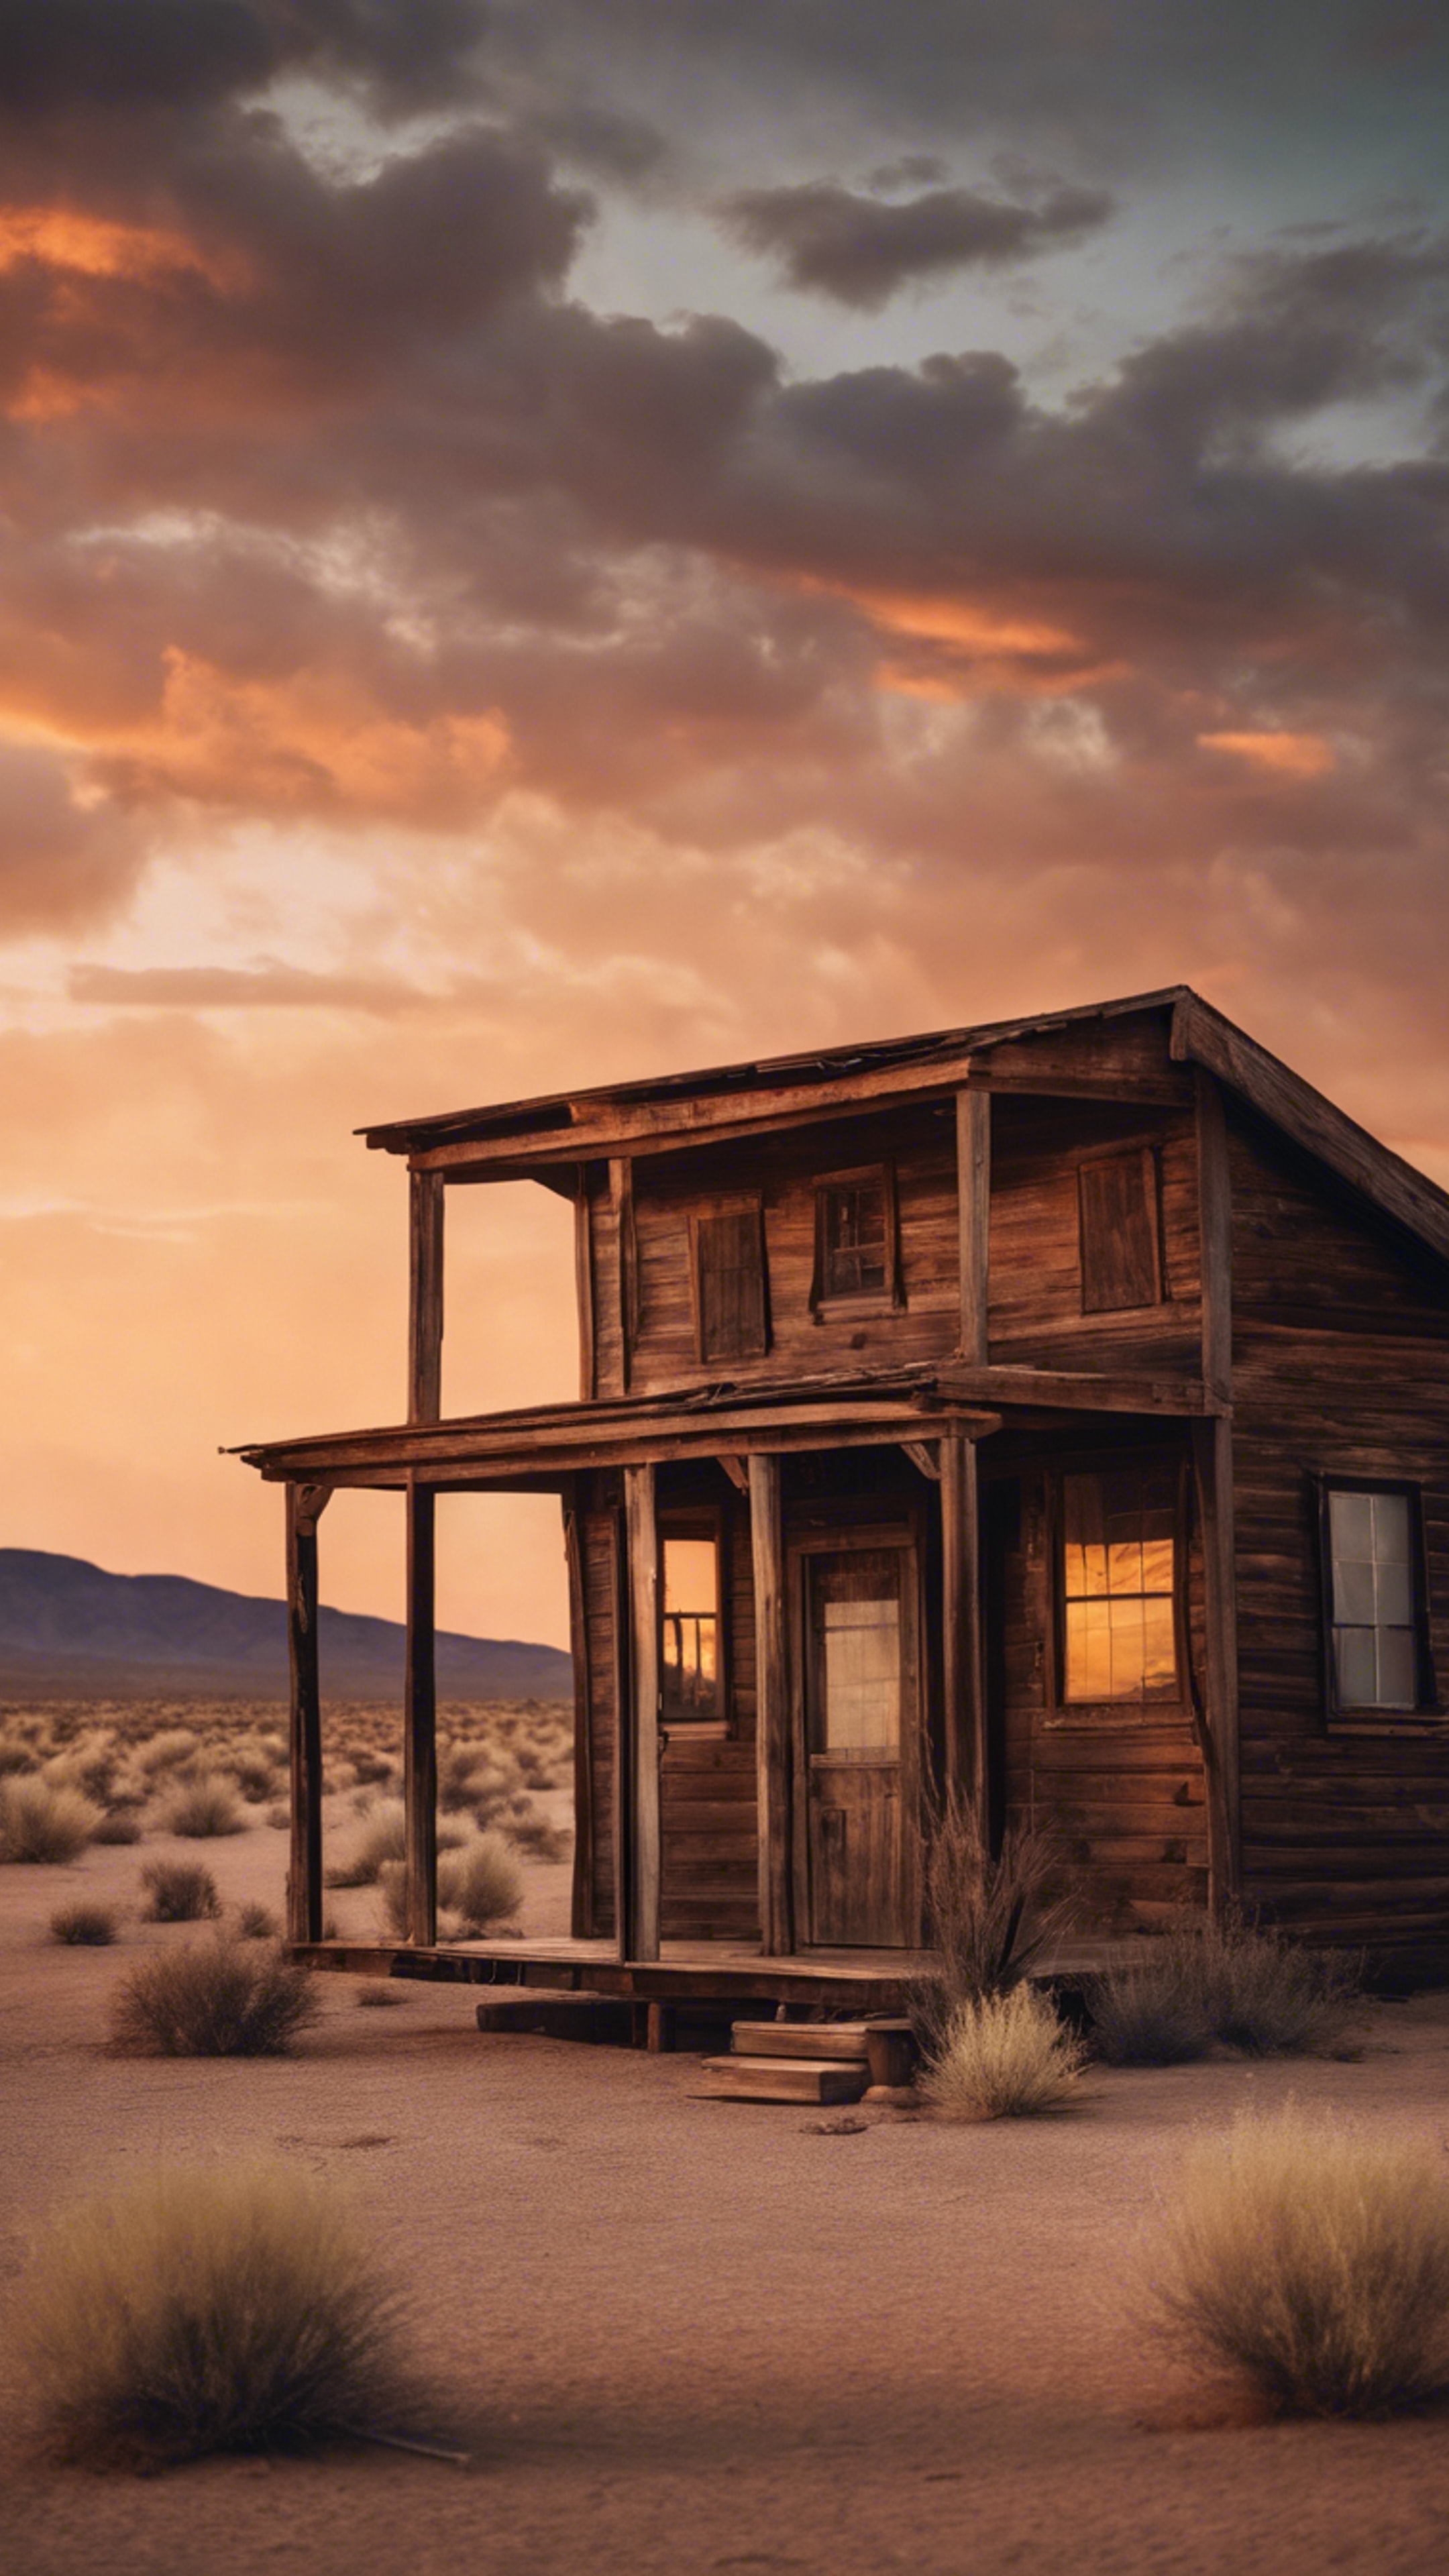 A dust-swept desert scene with a lone cabin standing resiliently during a blazing sunset in the wild west. Tapet[55ae6b4a2ff440e59218]